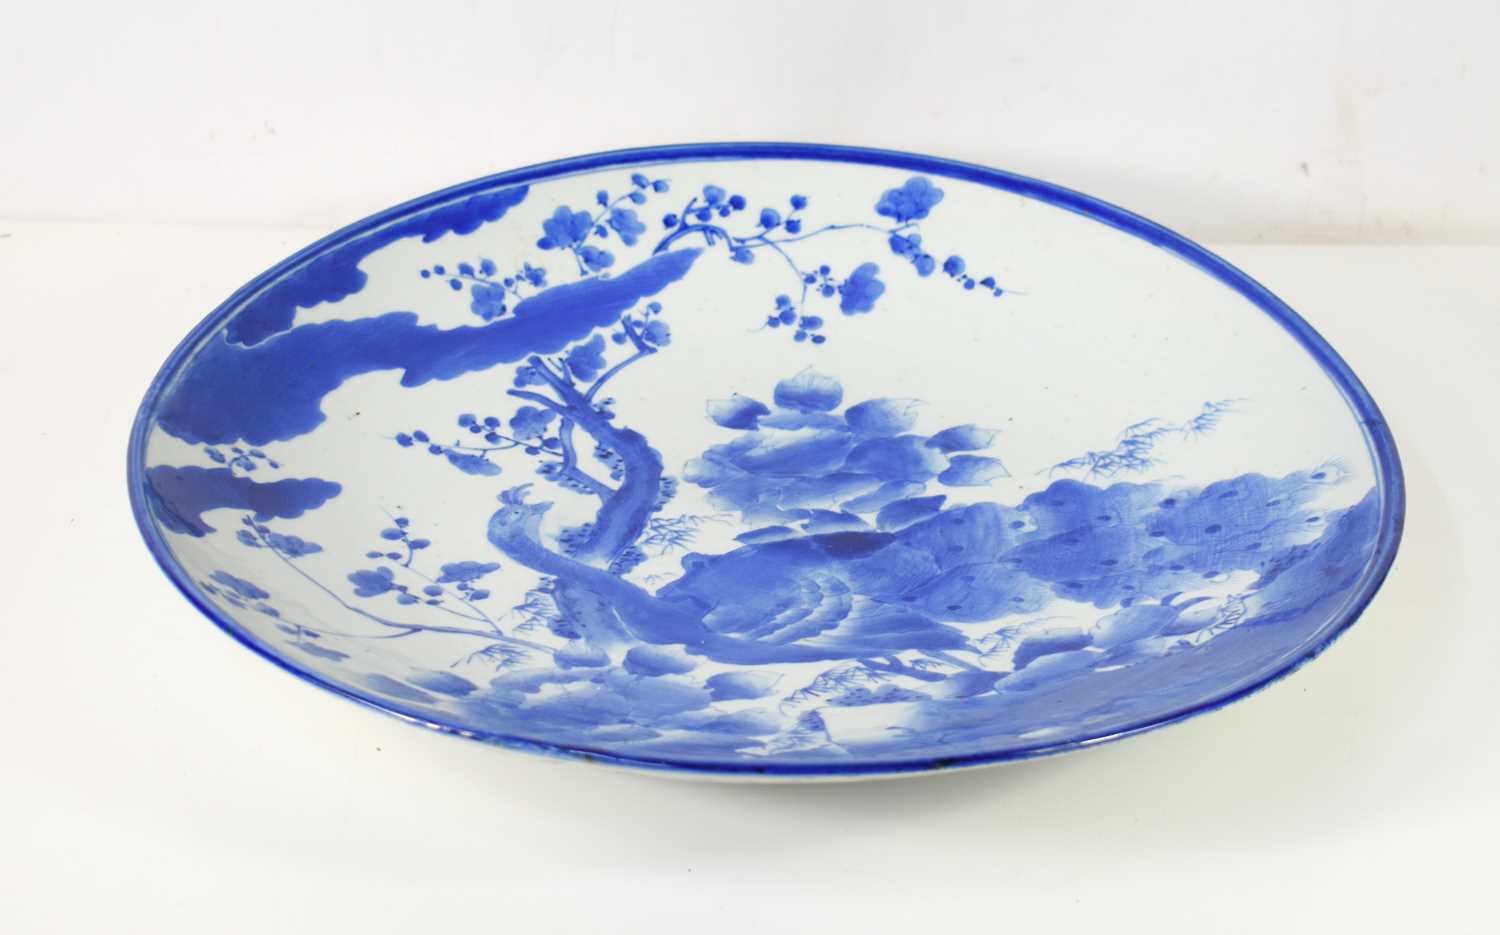 An early 19th century Chinese blue and white porcelain charger, decorated with a peacock amongst - Image 3 of 5